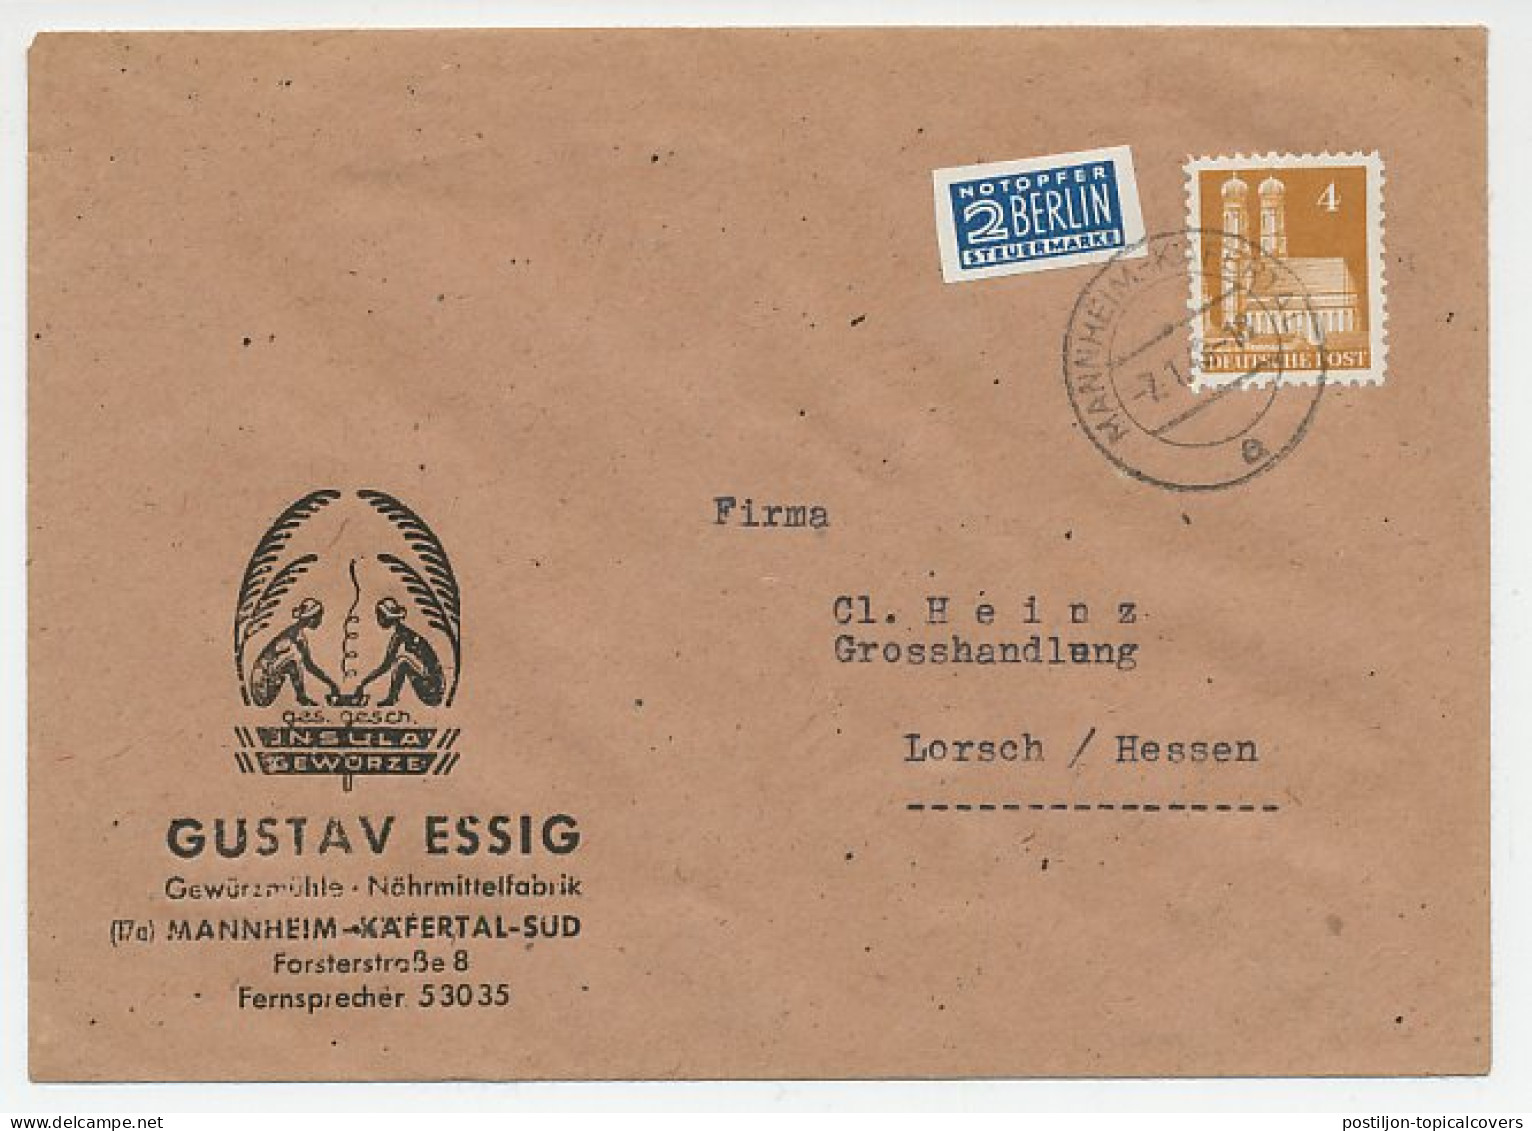 Illustrated Cover Deutsche Post / Germany 1949 Insula - Island - Spices - American Indians